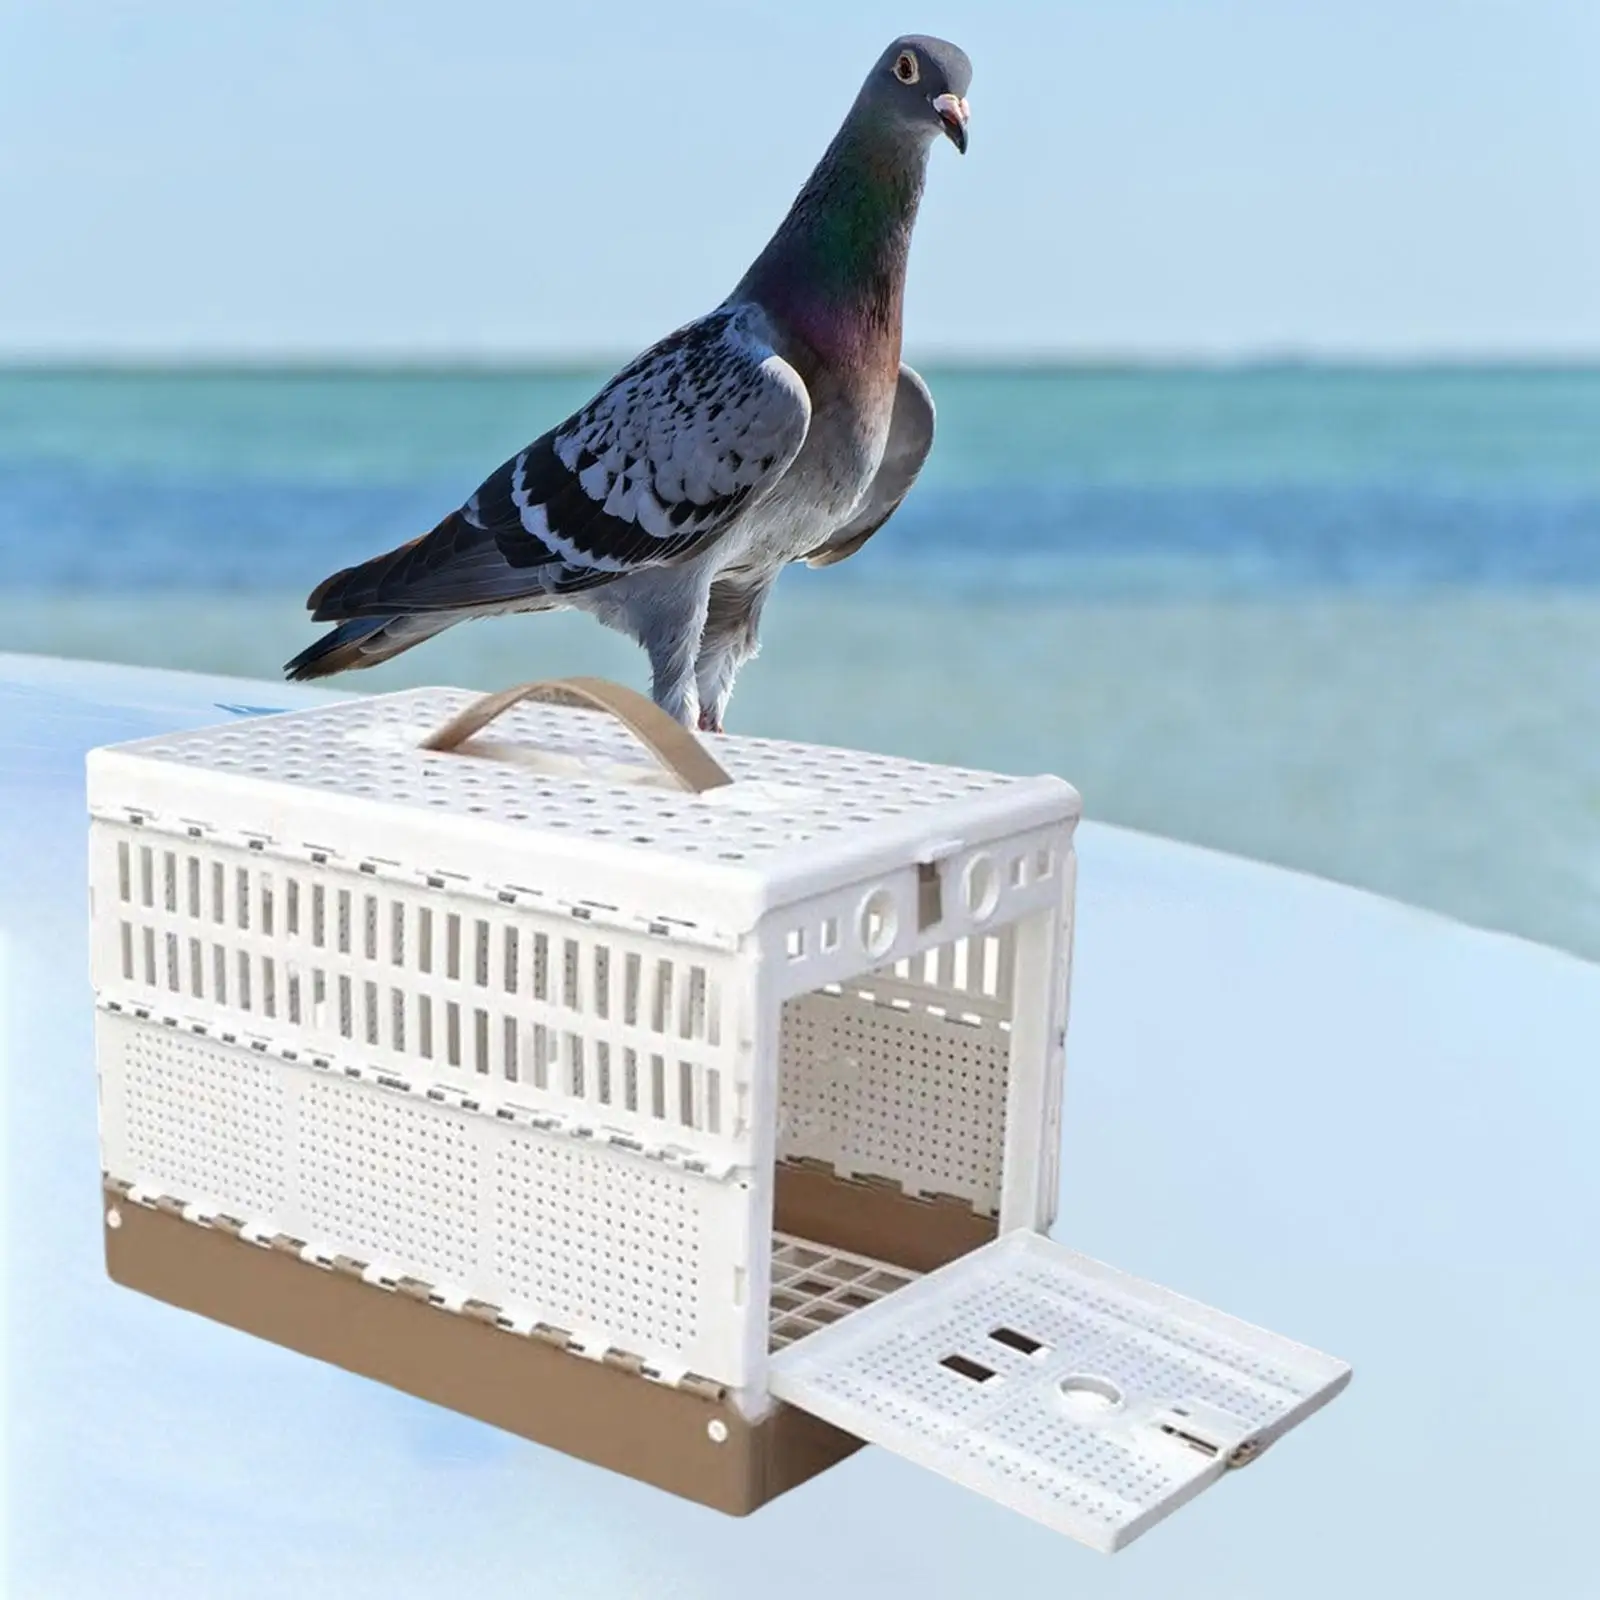 Pigeon Cage Parakeet Cage Poultry Bird Cage Folding Pairing Cage Pigeon Supplies Small Animal Pigeon Training Cage for Travel